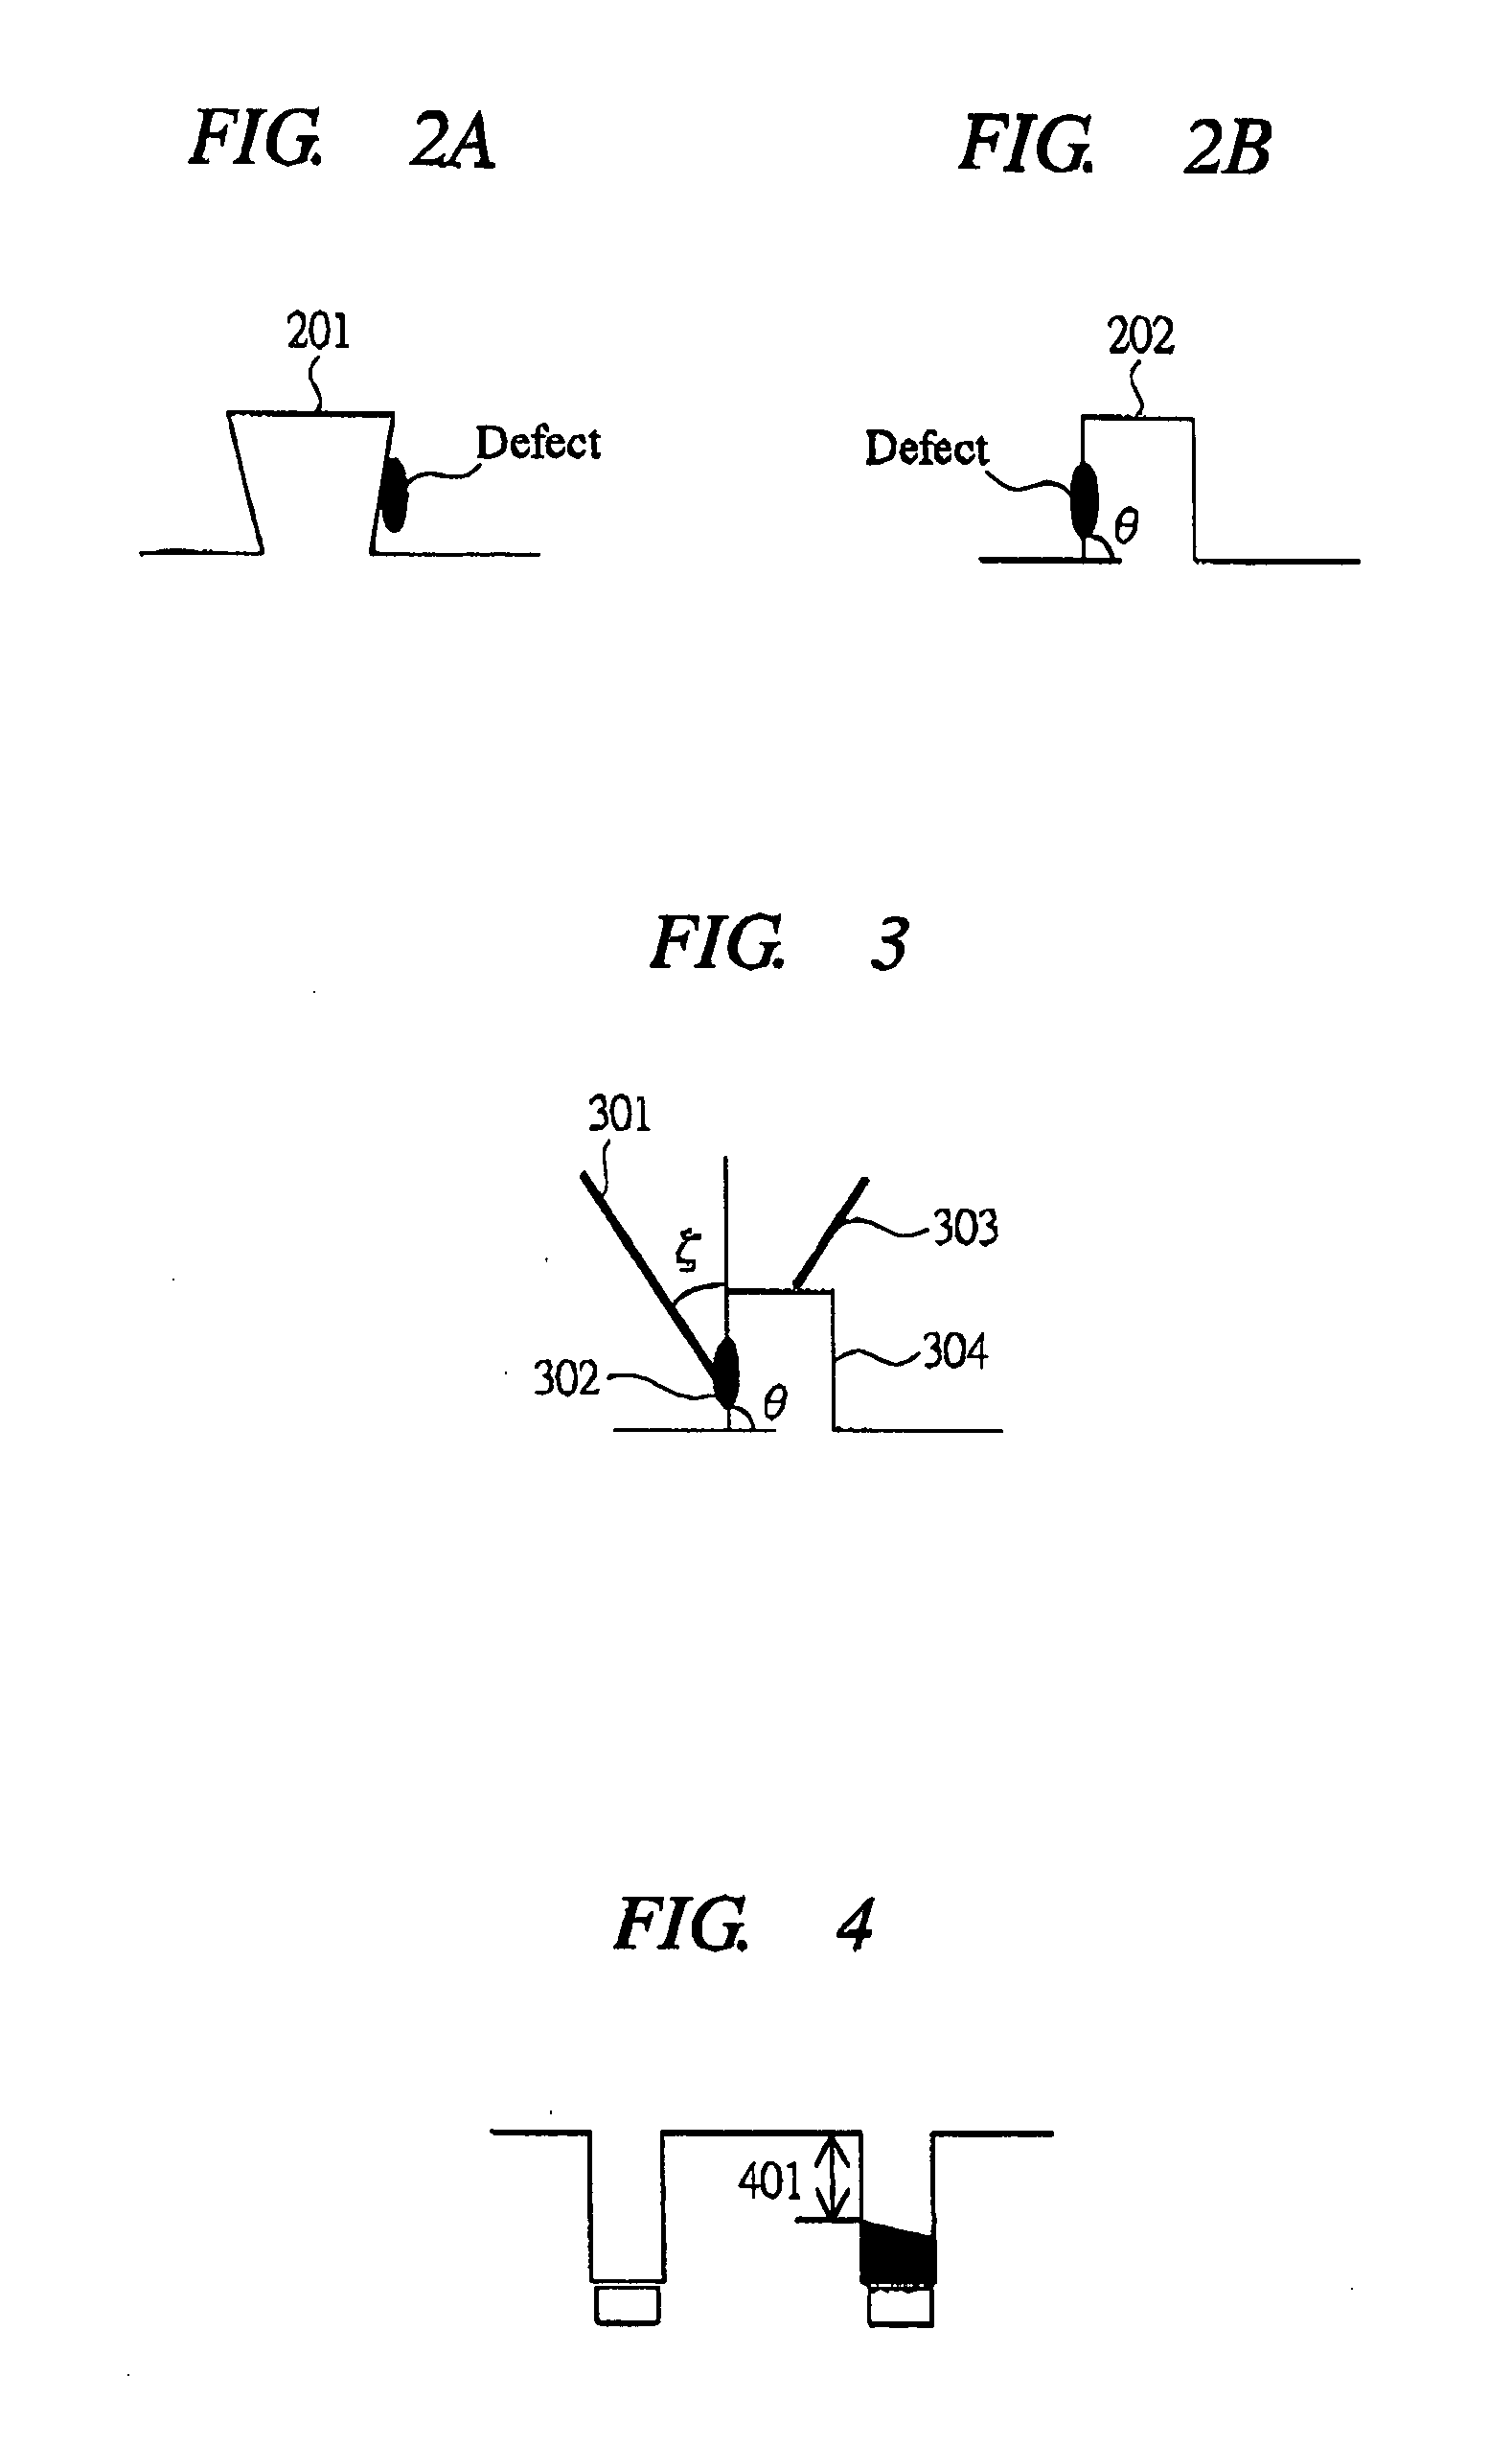 Method of observing defects